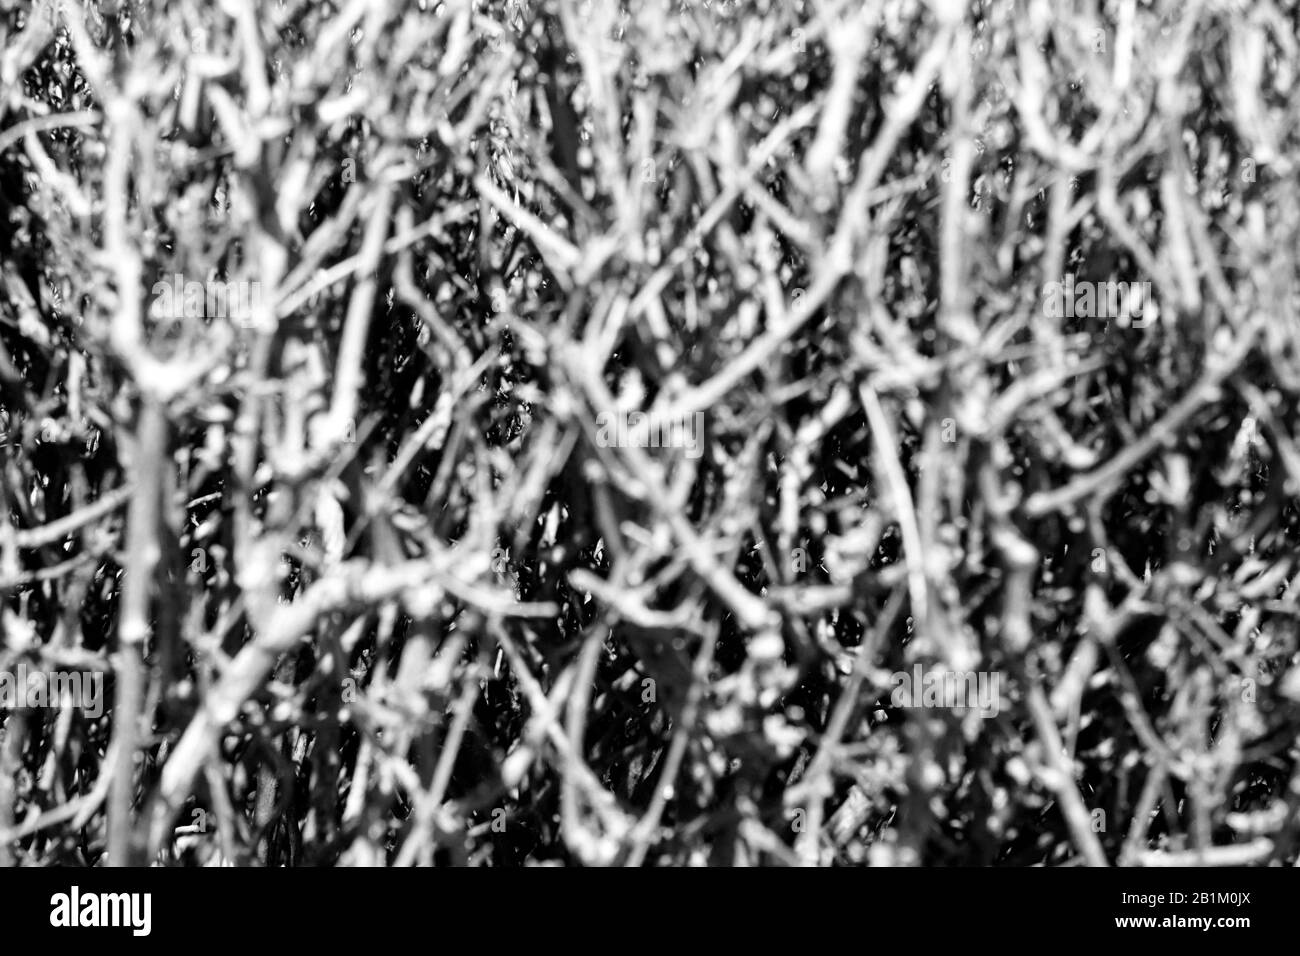 The bush - hedge black and white close up, no leaves, no flowers, a real plant background. Stock Photo